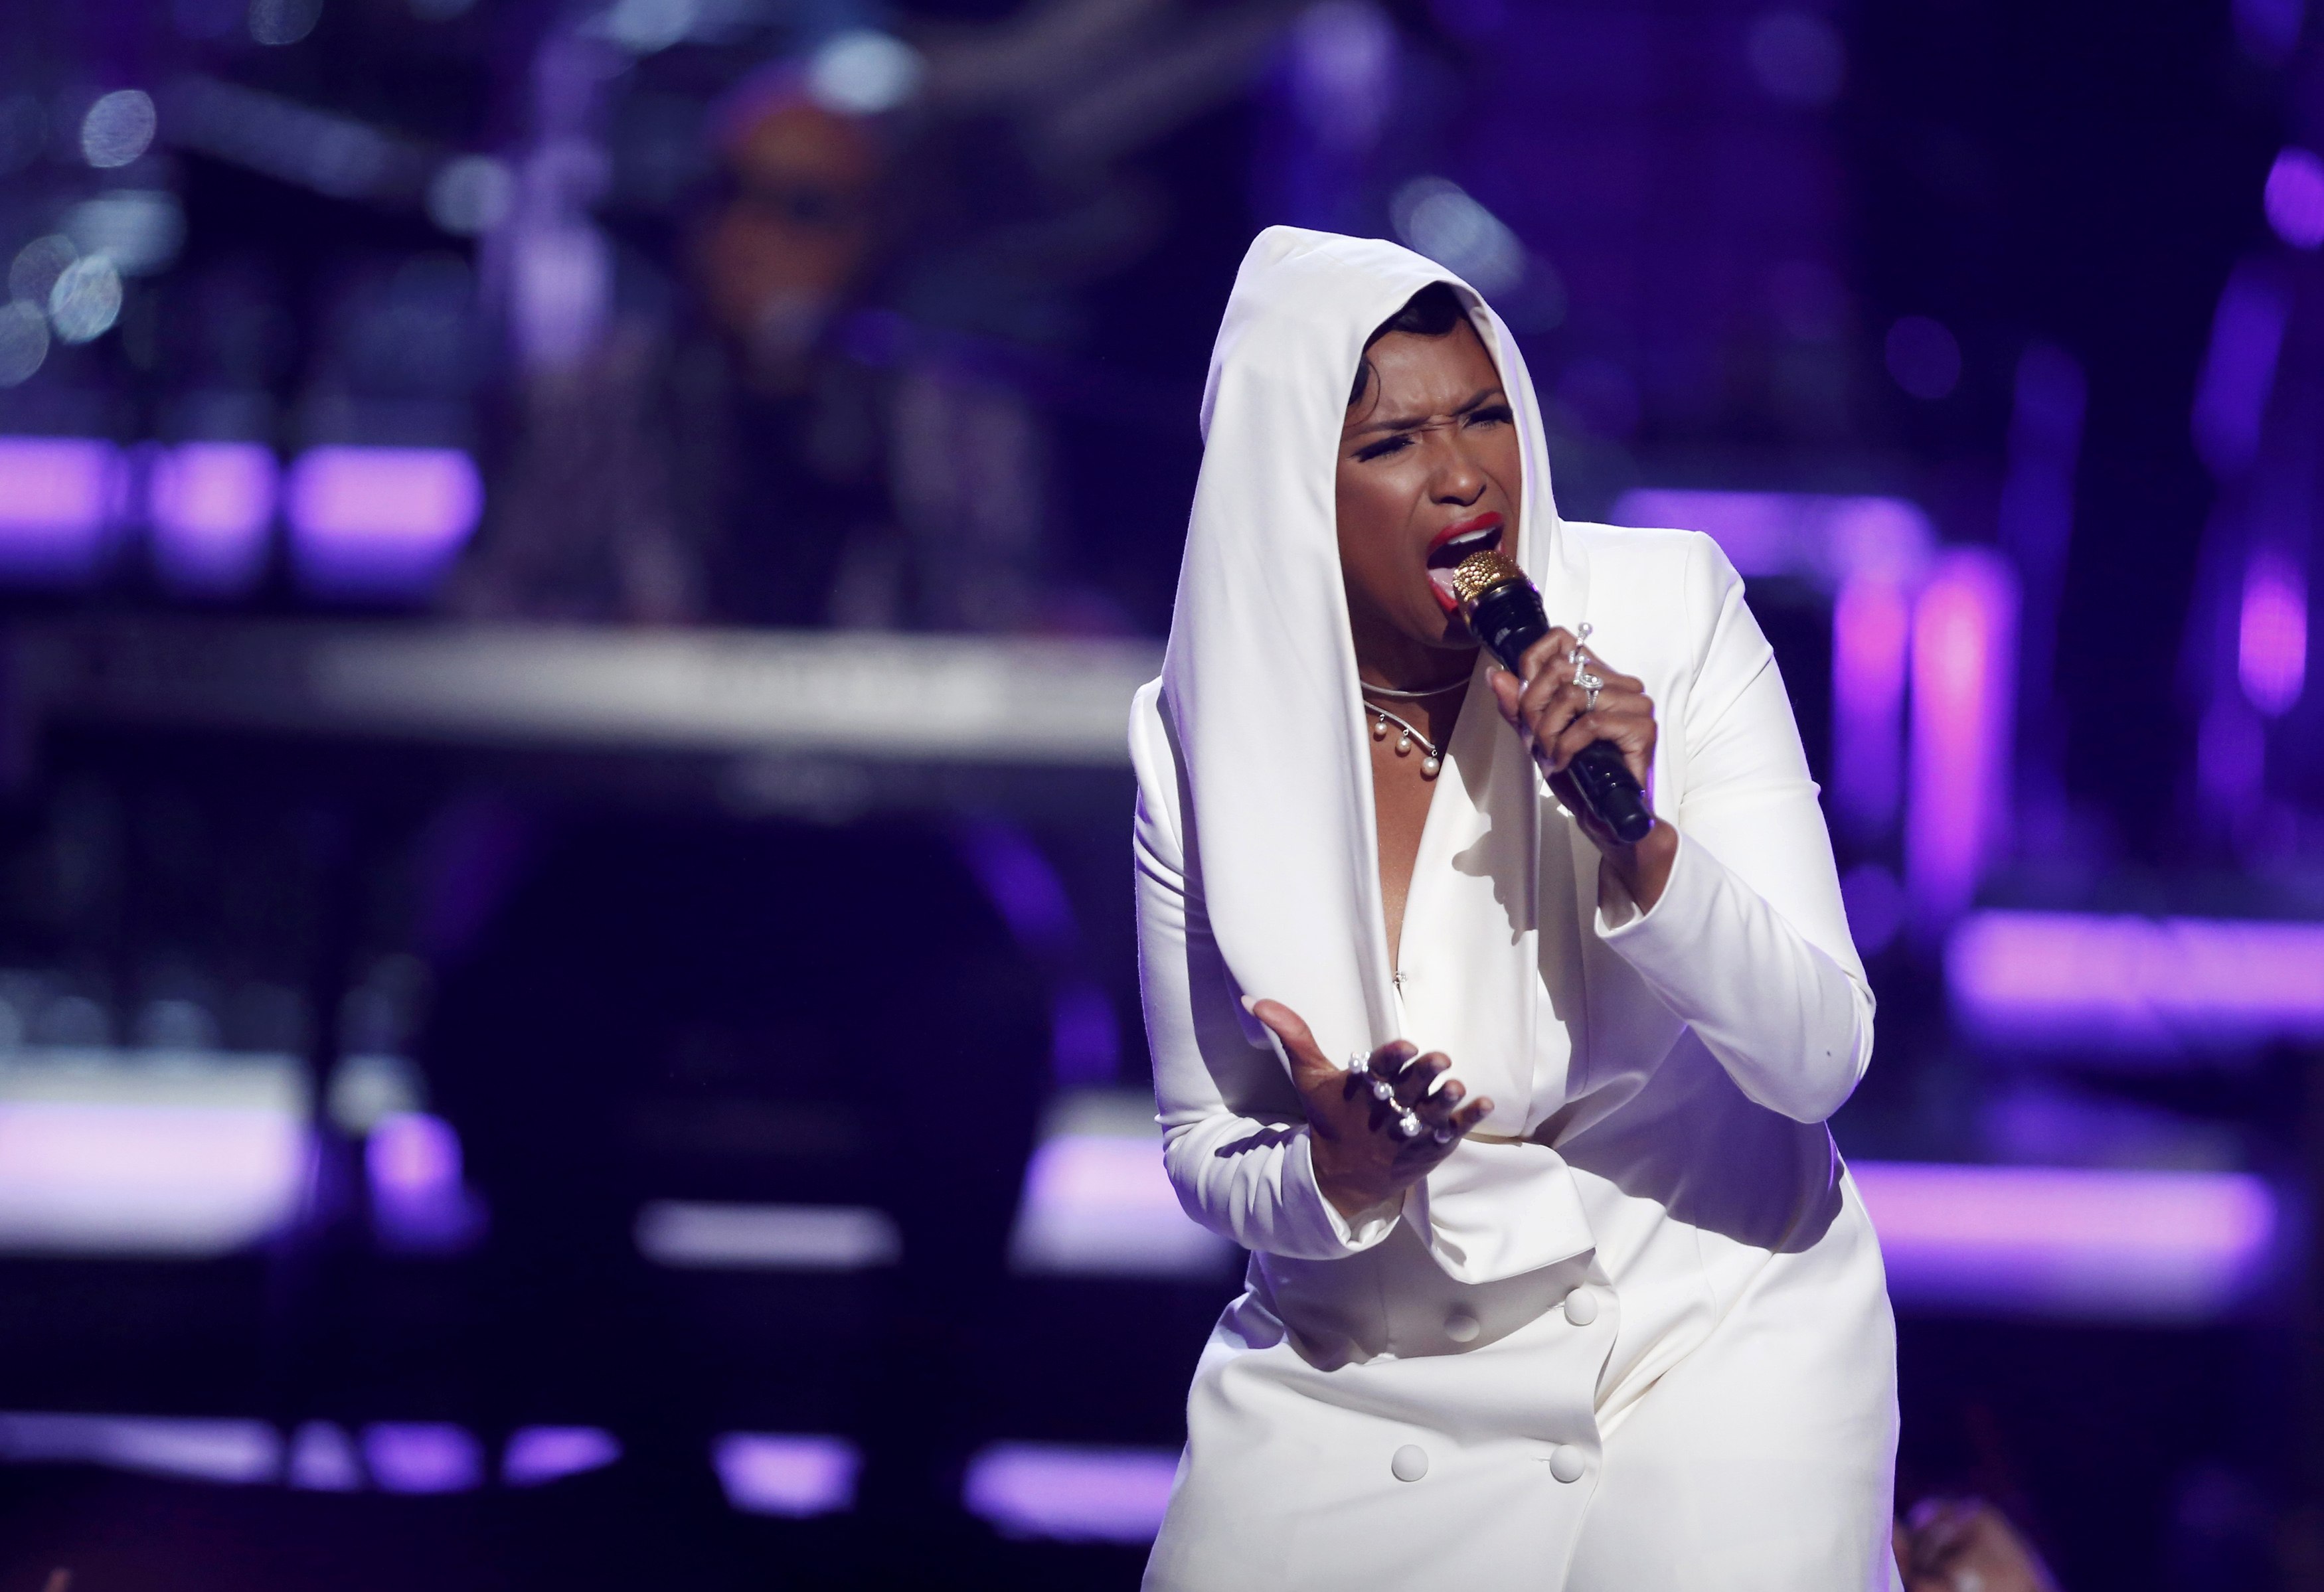 Jennifer Hudson joining “The Voice” as a coach